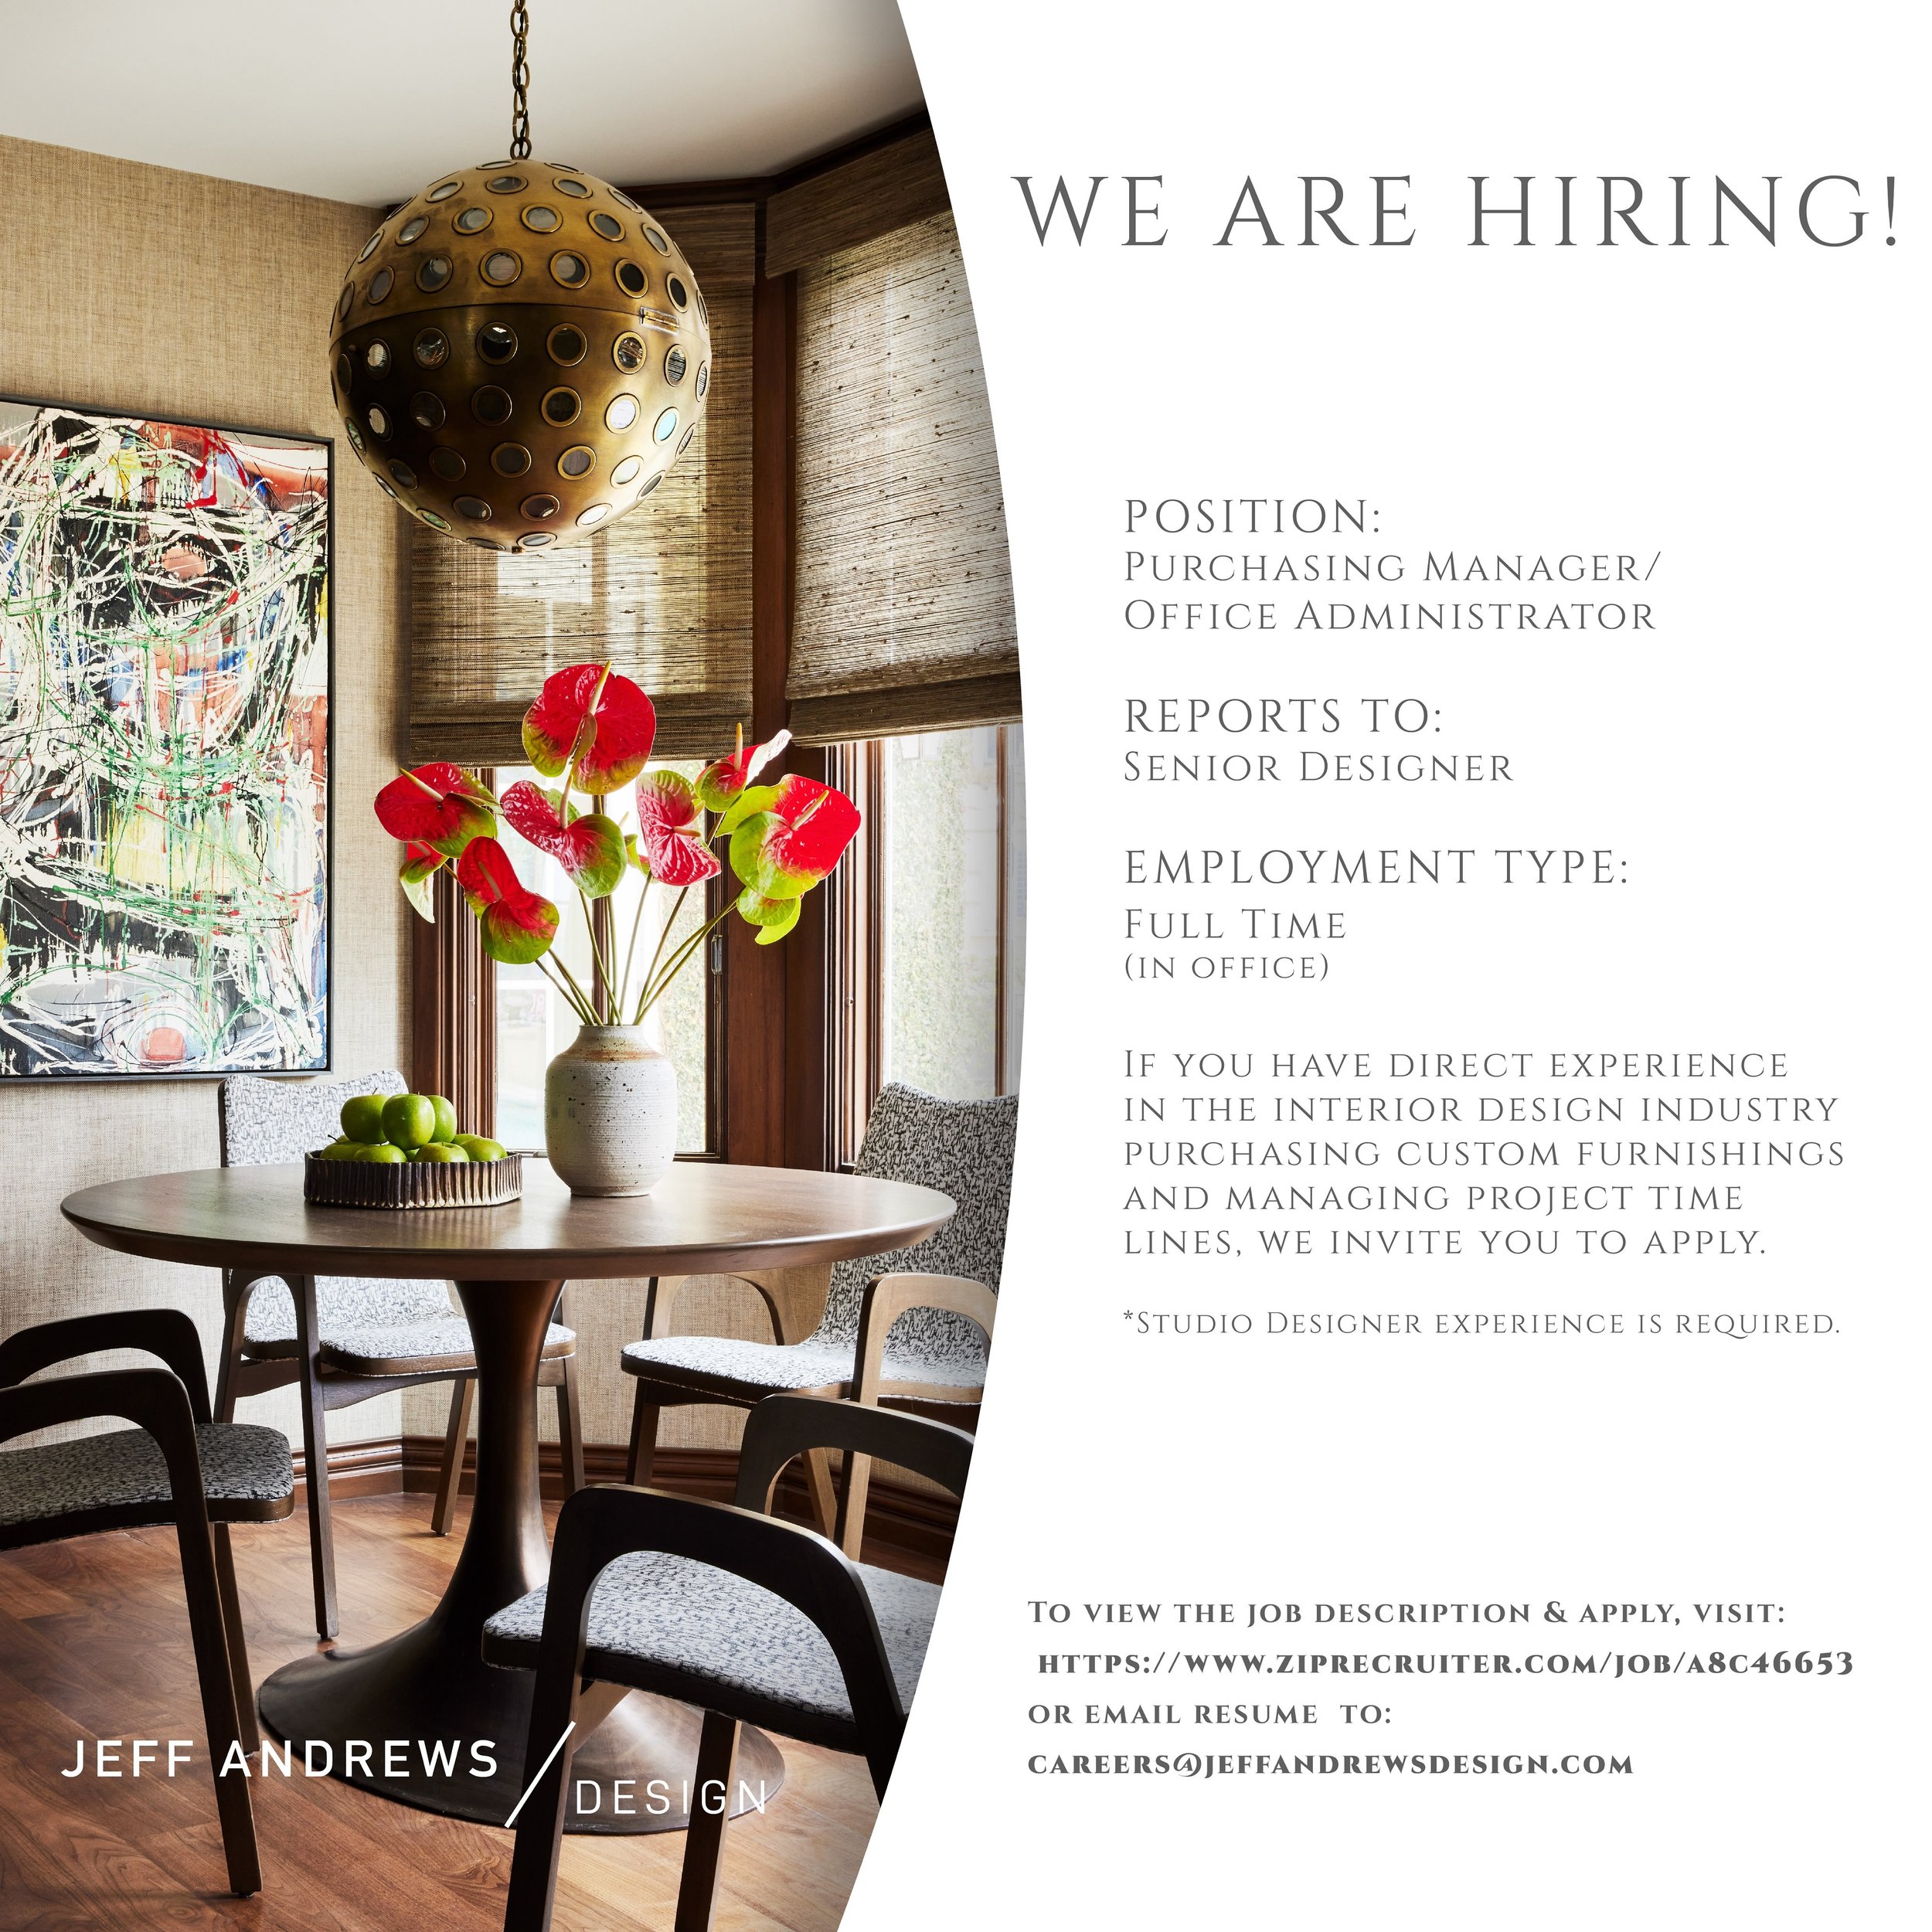 Come join us! 
Link in bio to apply OR email careers@jeffandrewsdesign.com